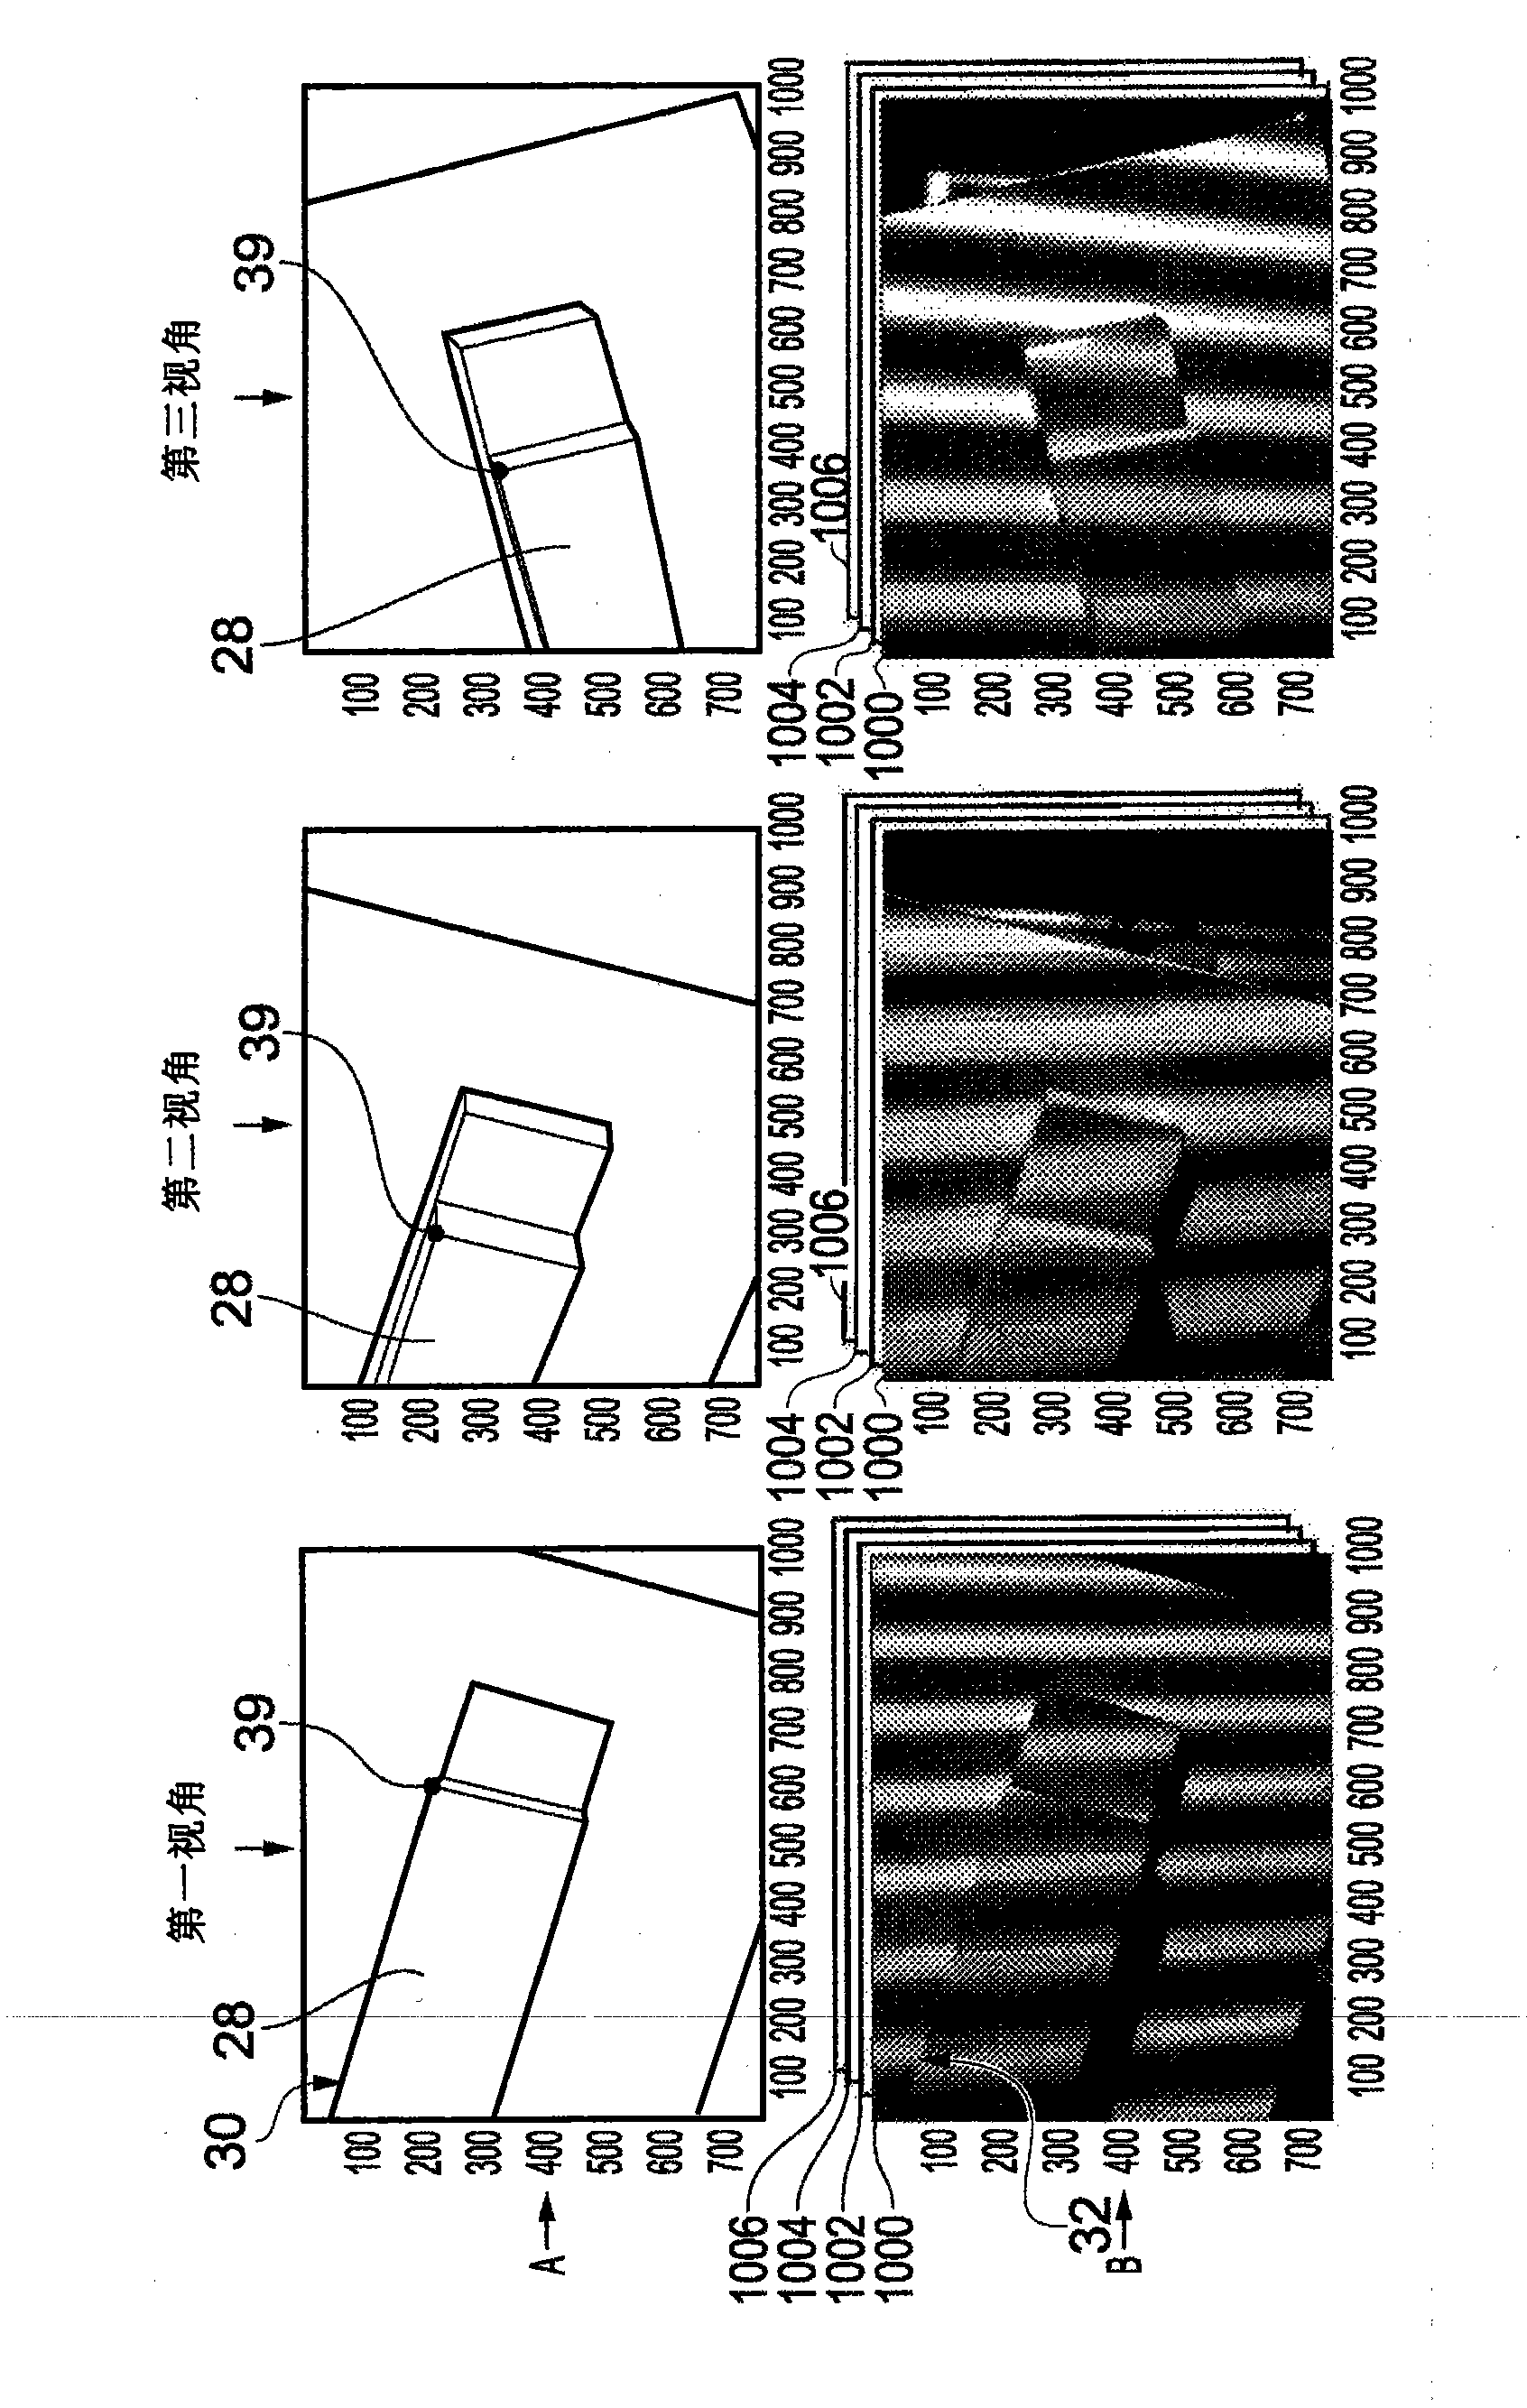 Non-contact measurement apparatus and method